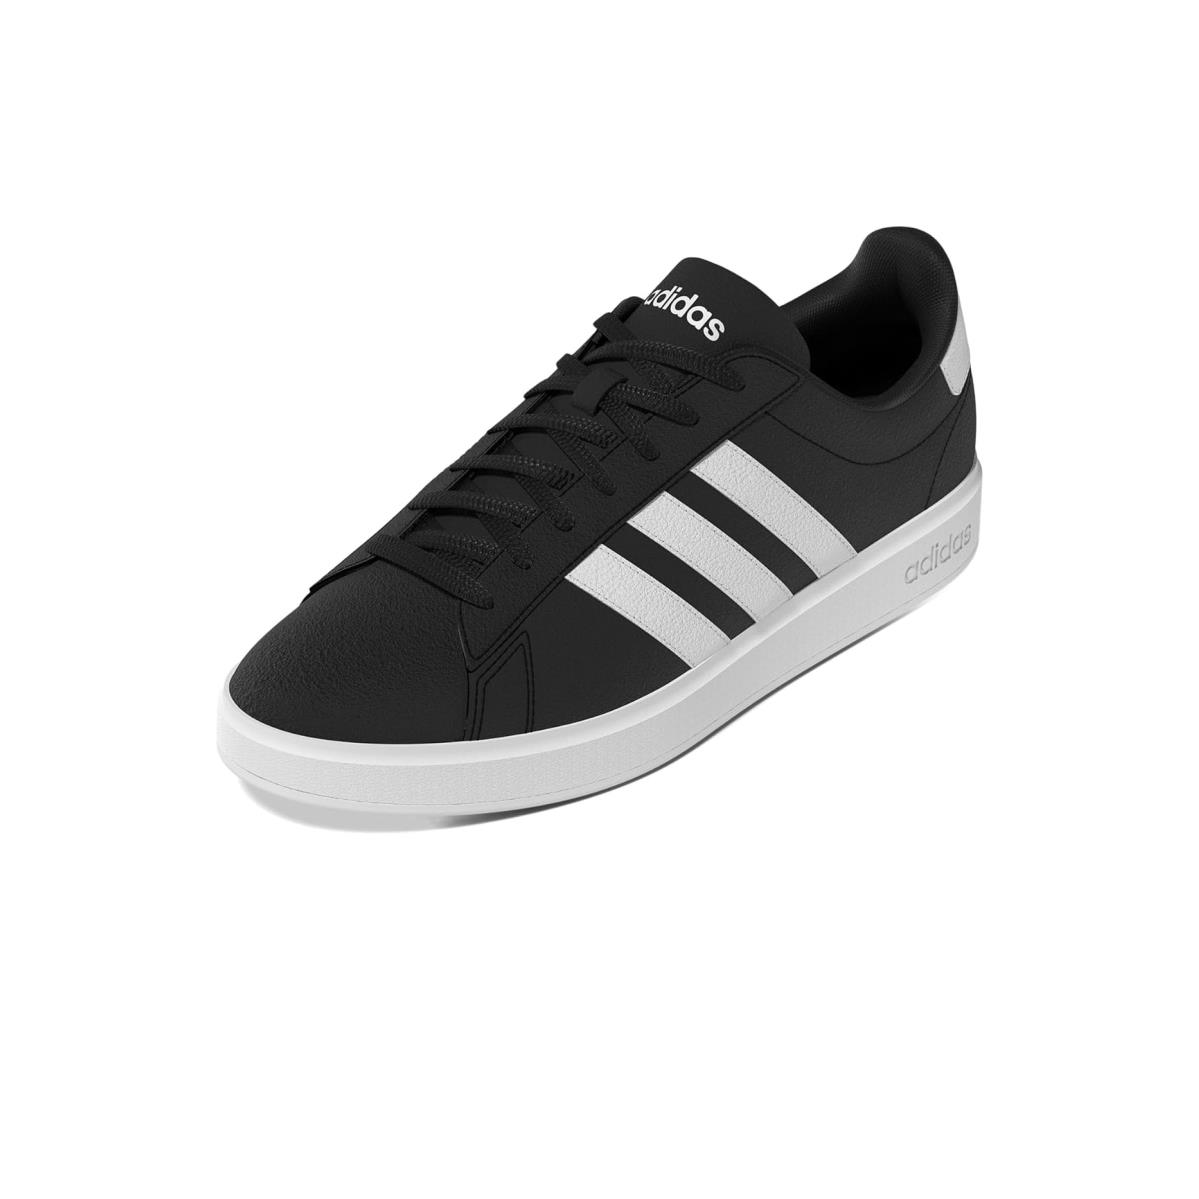 Man`s Sneakers Athletic Shoes Adidas Grand Court 2.0 Black/White/Black